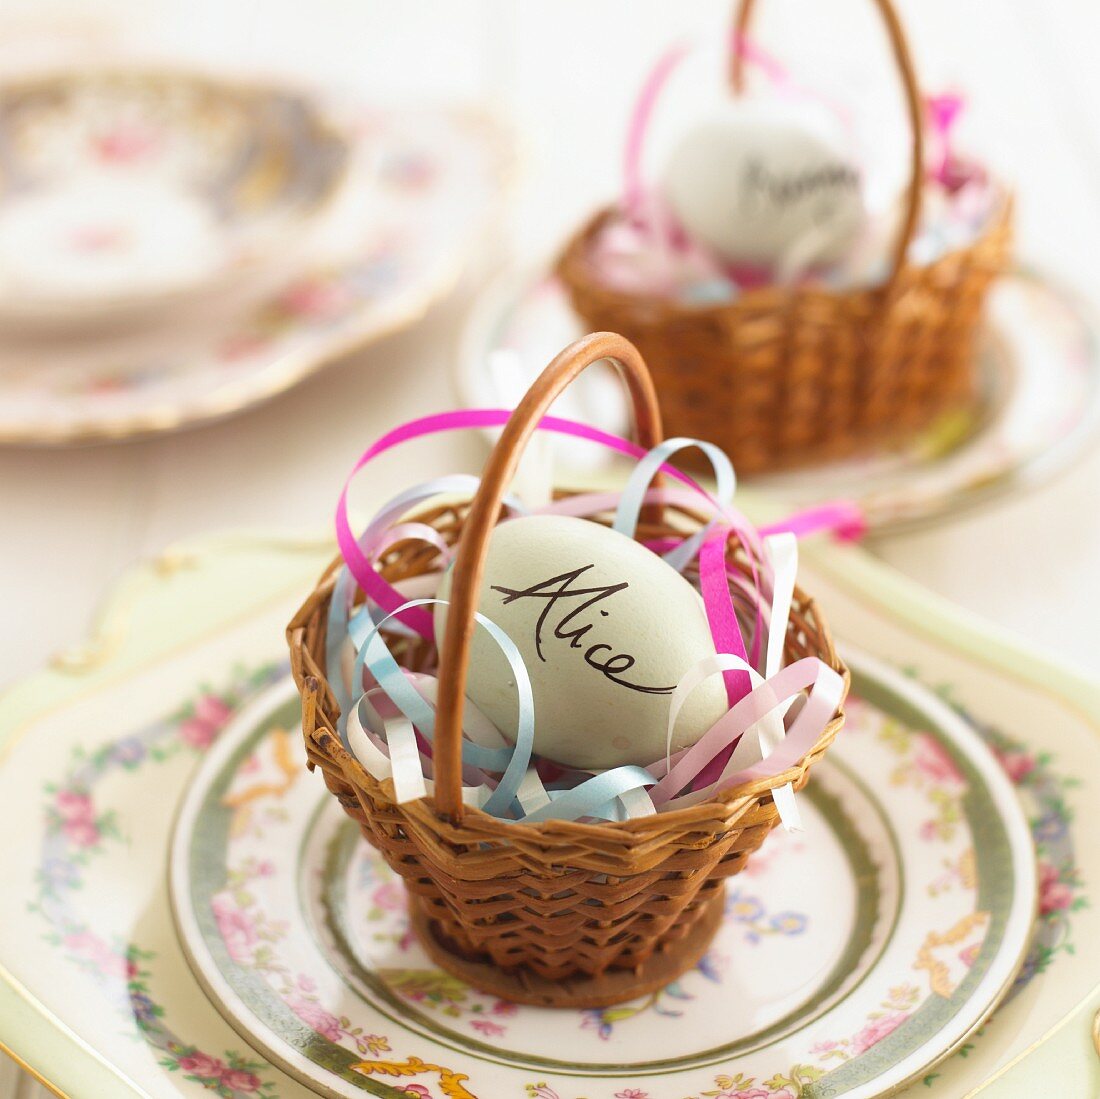 An Easter place setting for a child